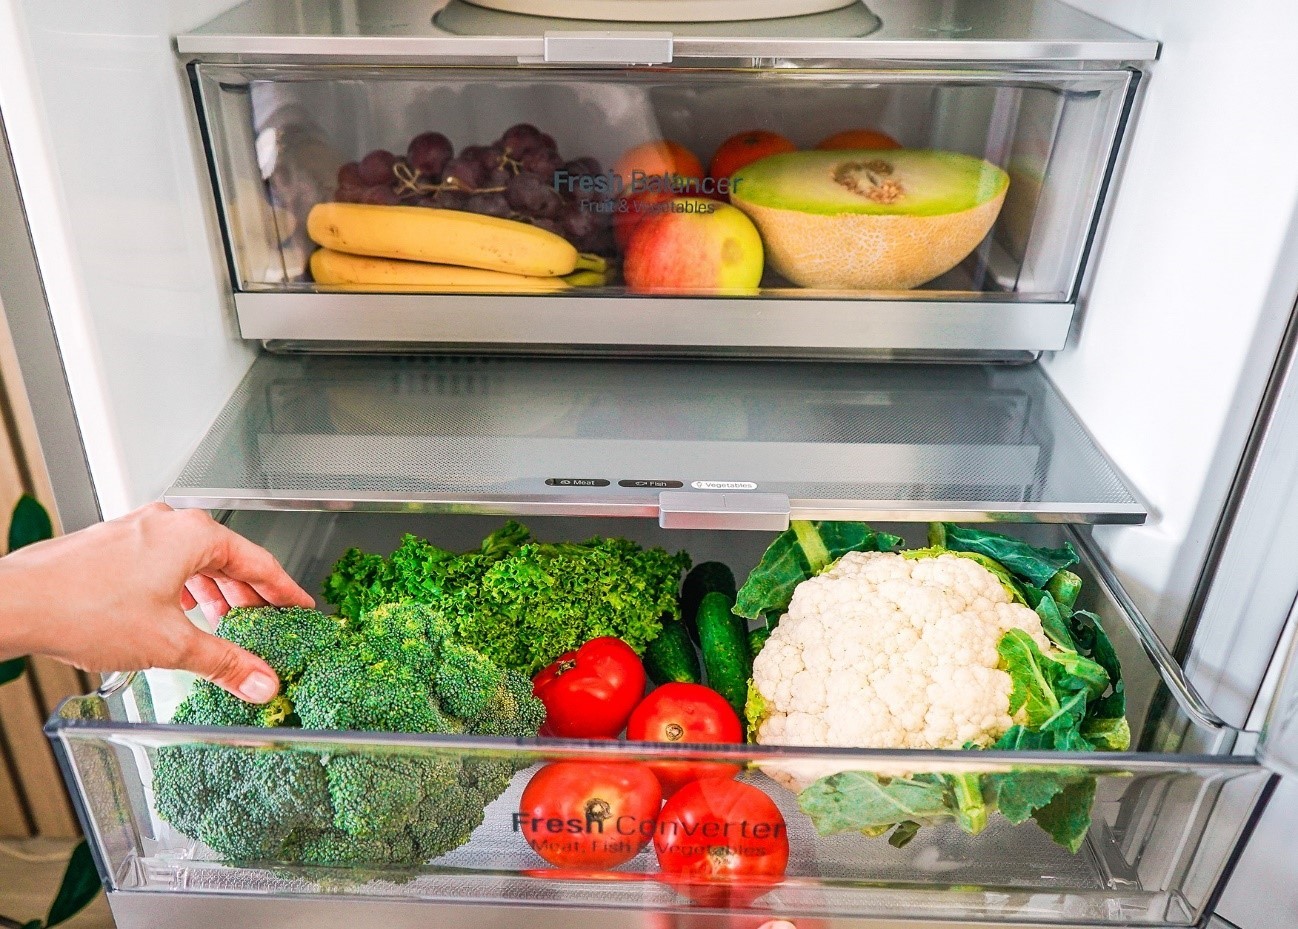 A close-up of LG V+ refrigerator’s innovative Fresh Balancer drawer on top of an opened Fresh Converter drawer, the former holding fruits and the latter storing vegetables.